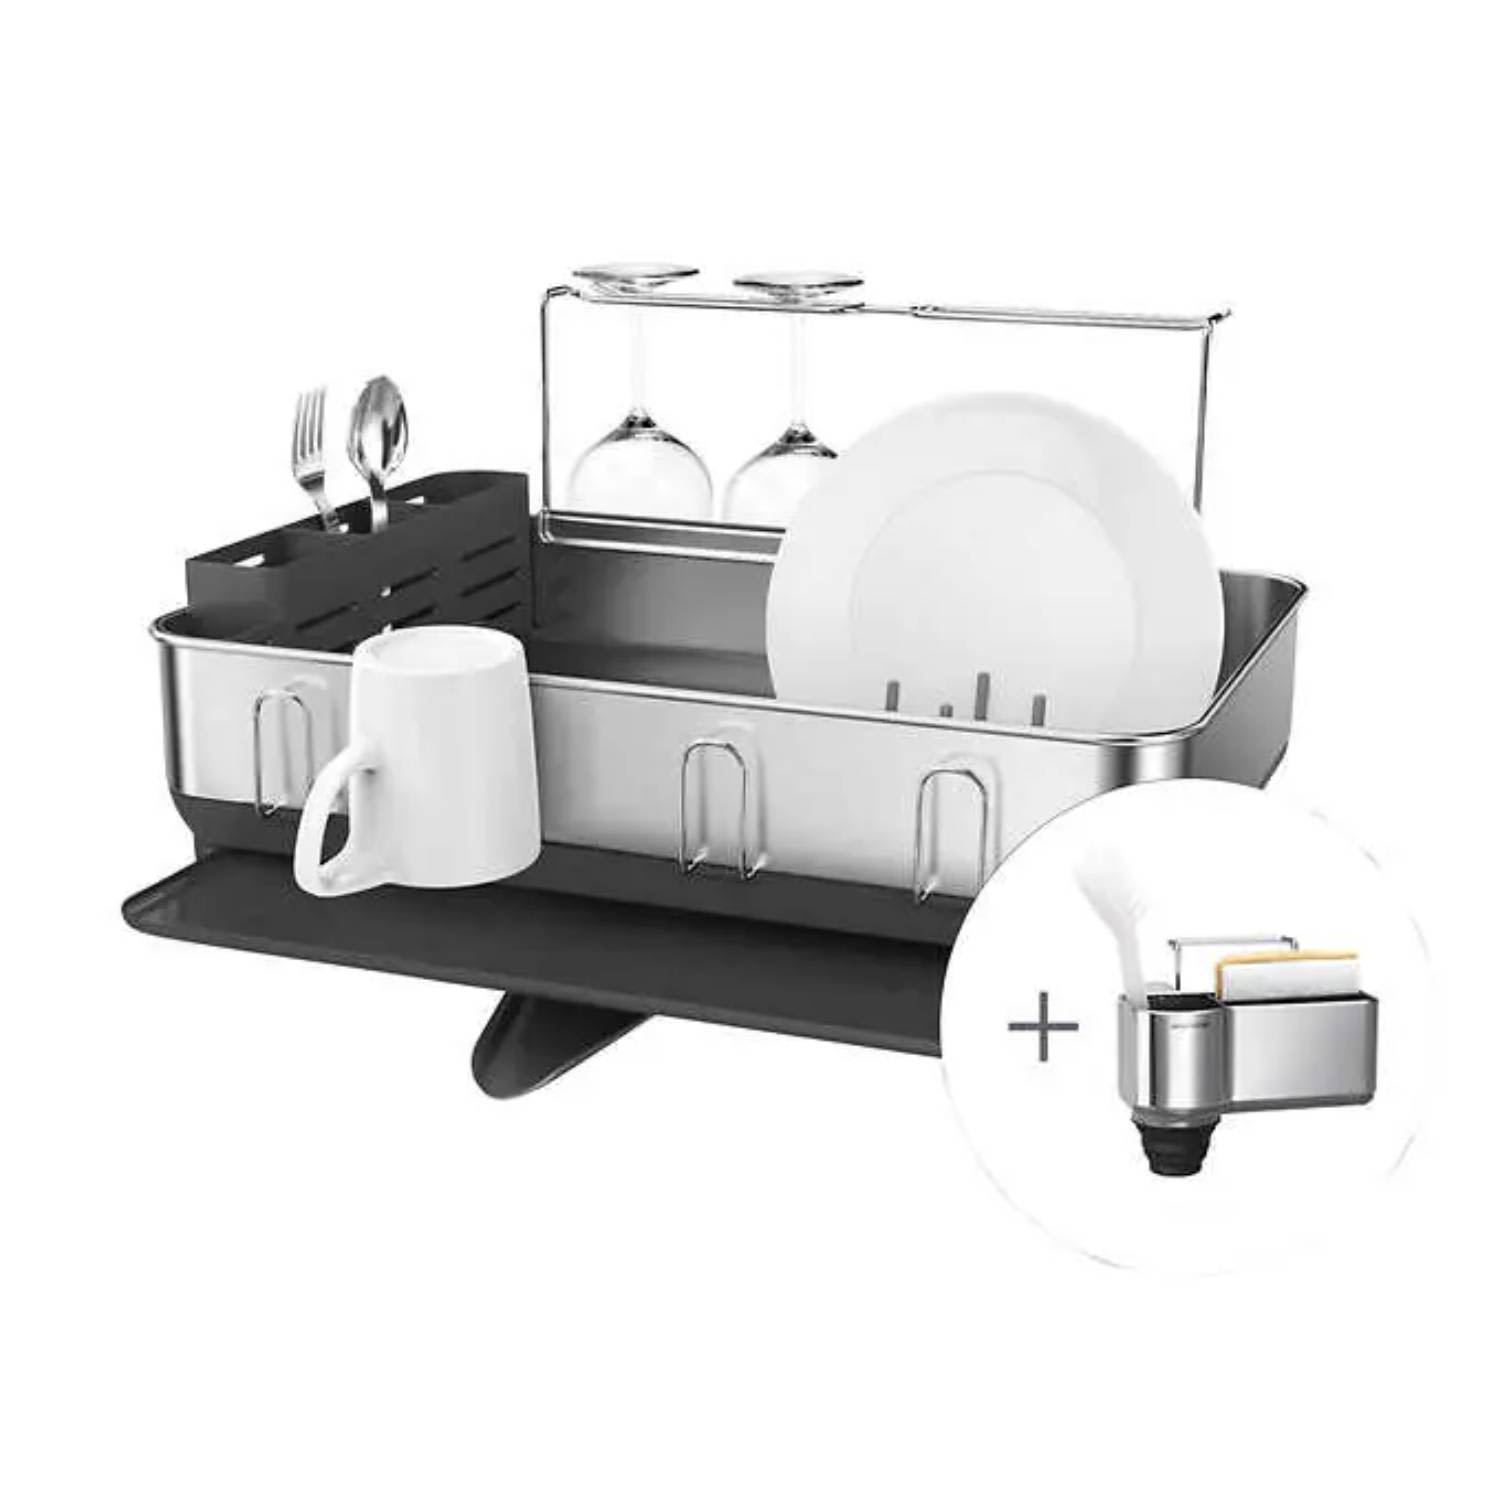 The simplehuman Dish Rack at Costco Is on Major Sale